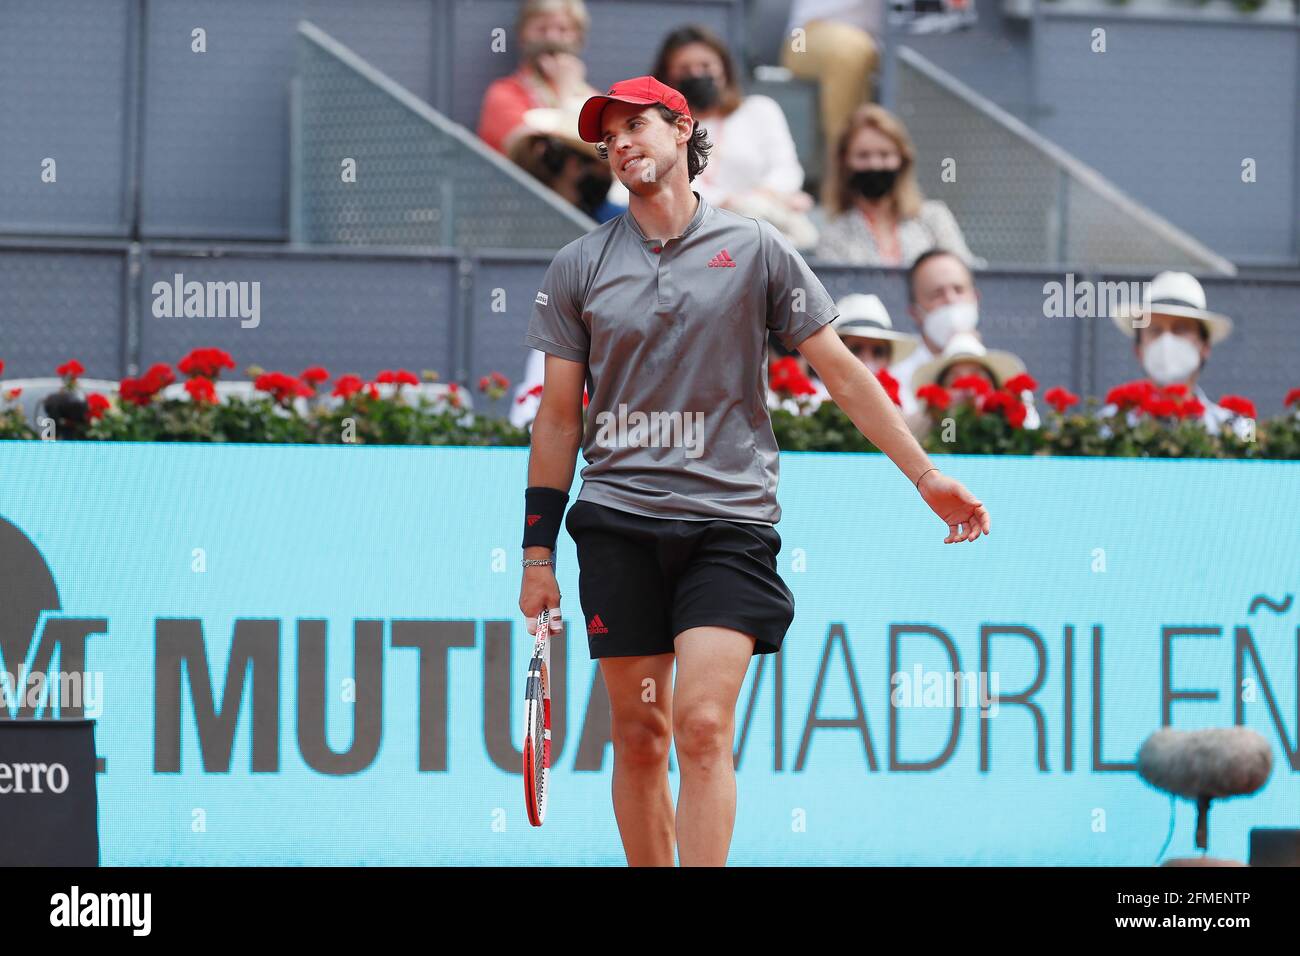 Madrid, Spain. 8th May, 2021. Dominic Thiem (AUT) Tennis : Dominic Thiem of Austria regret after miss point during singles Semi finals match against Alexander Zverev of Germany on the ATP Masters 1000 'Mutua Madrid Open tennis tournament' at the Caja Magica in Madrid, Spain . Credit: Mutsu Kawamori/AFLO/Alamy Live News Stock Photo